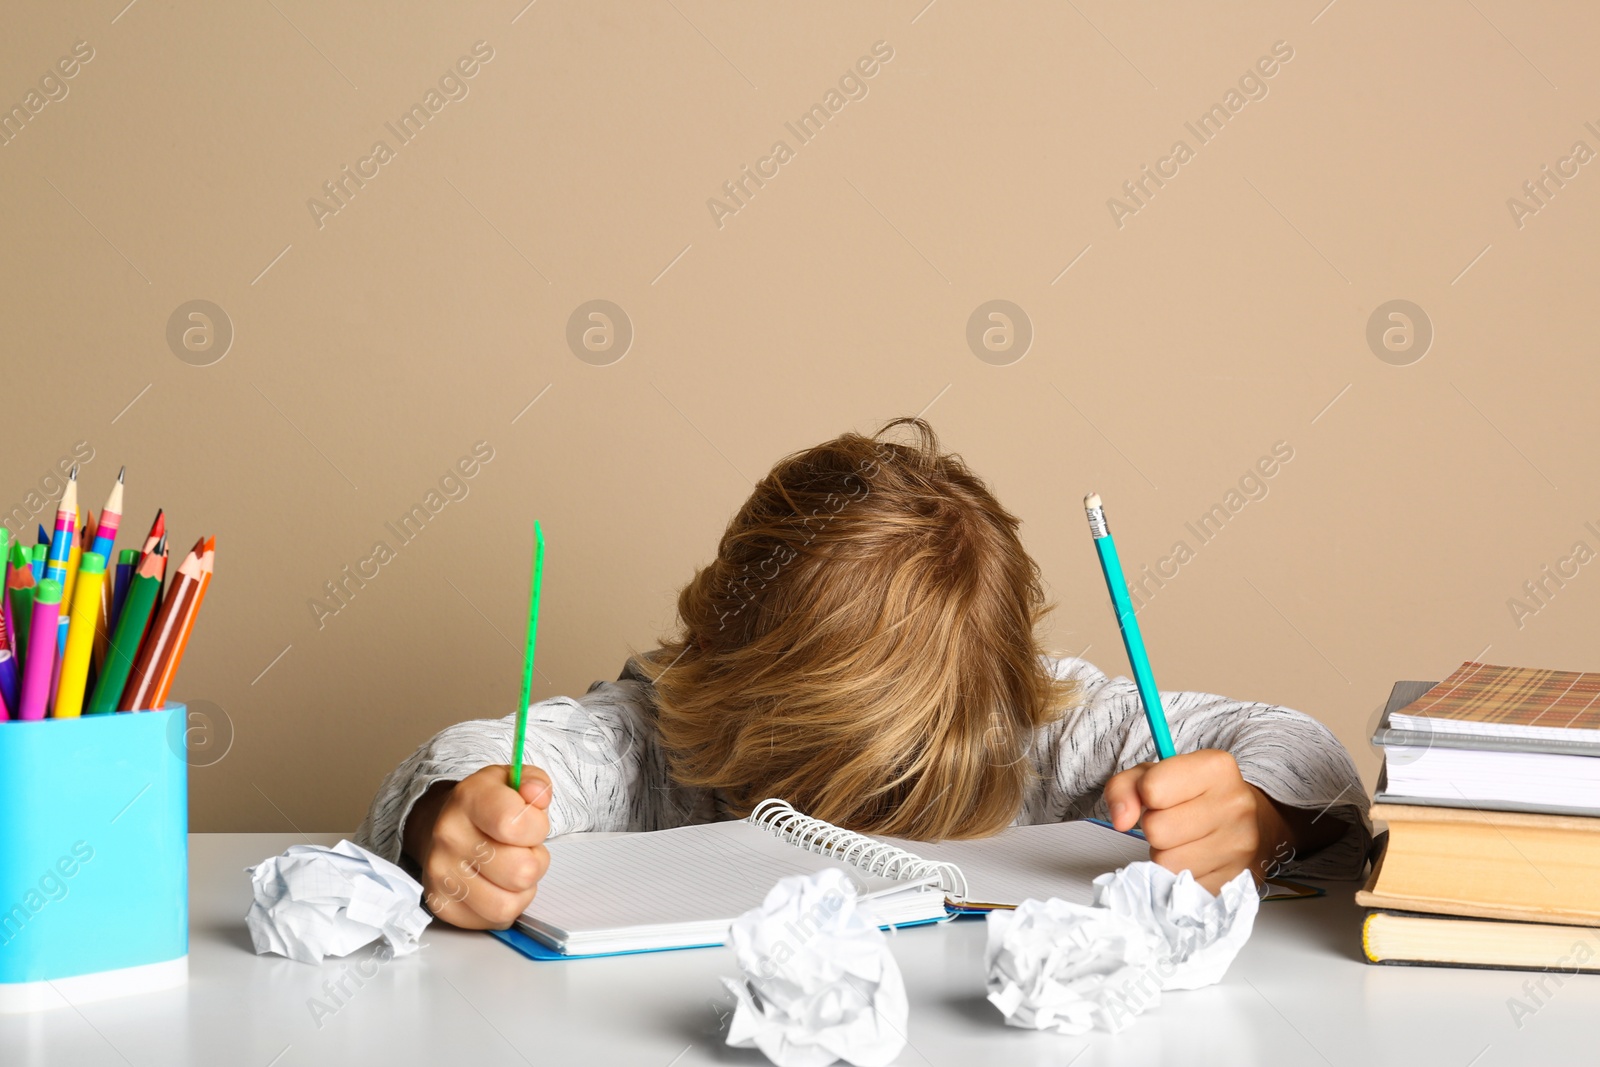 Photo of Tired little boy doing homework at table on beige background